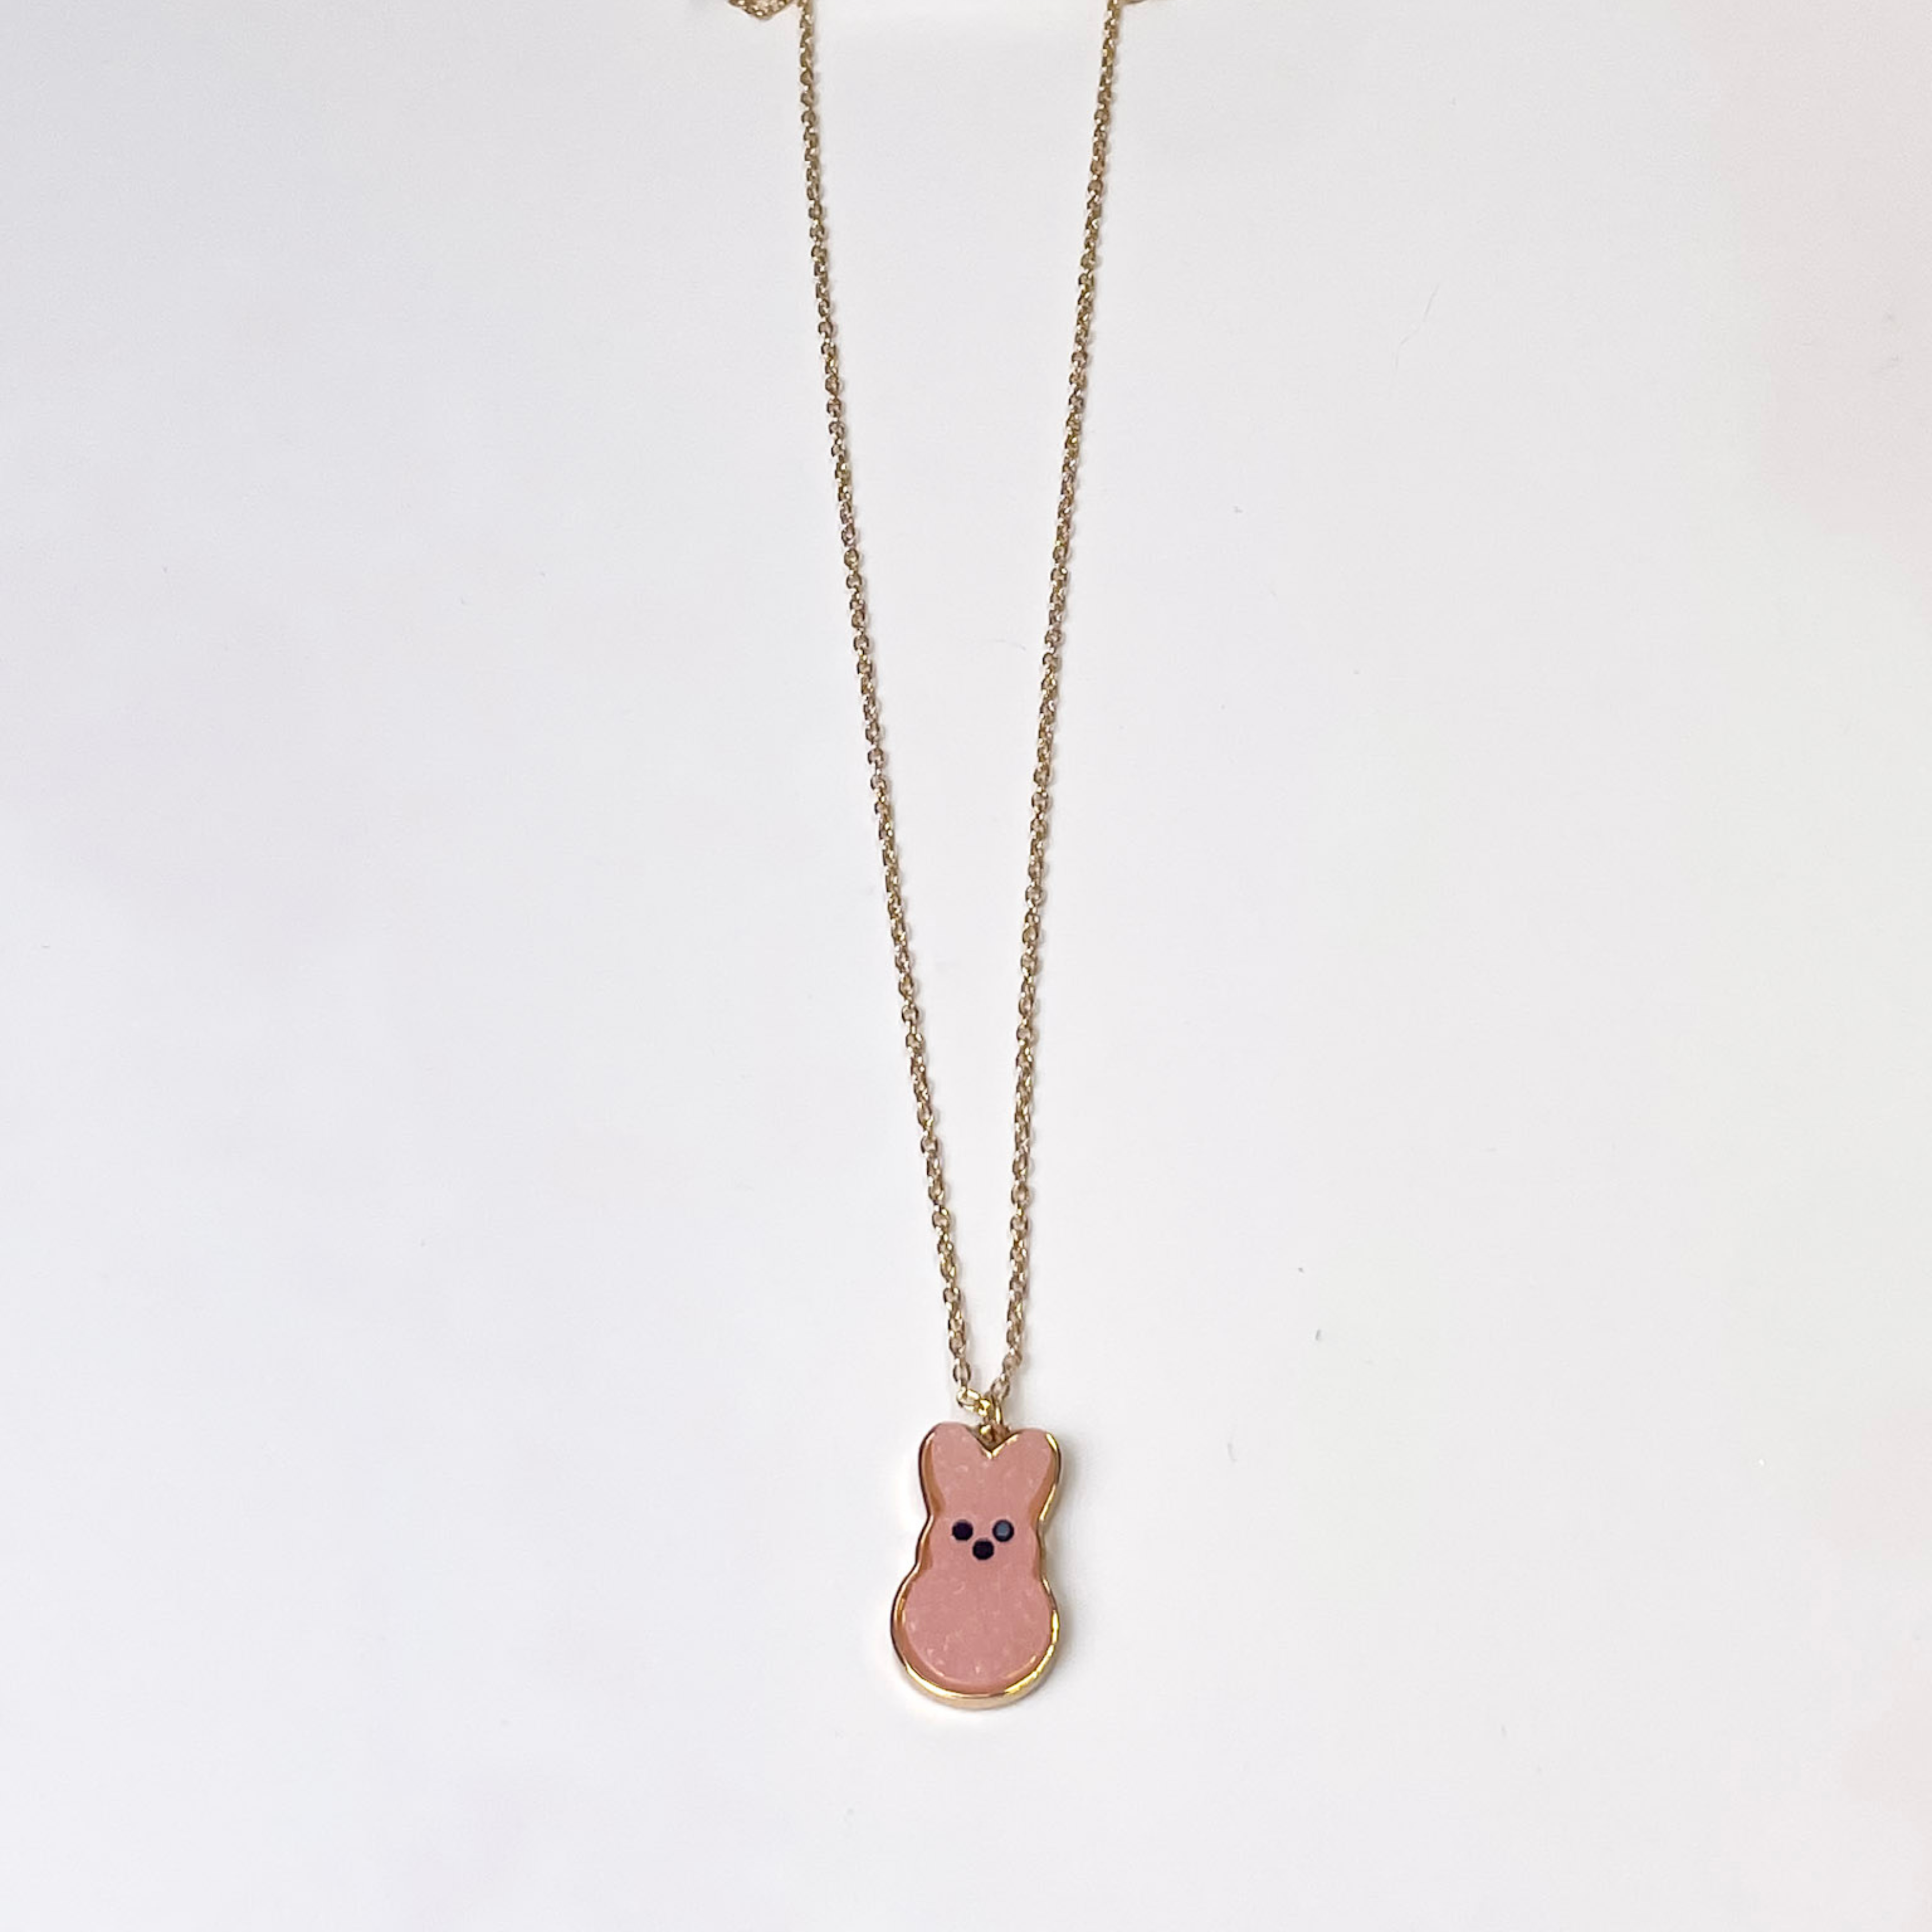 Gold Chain Necklace with Bunny Pendant in Pink - Giddy Up Glamour Boutique